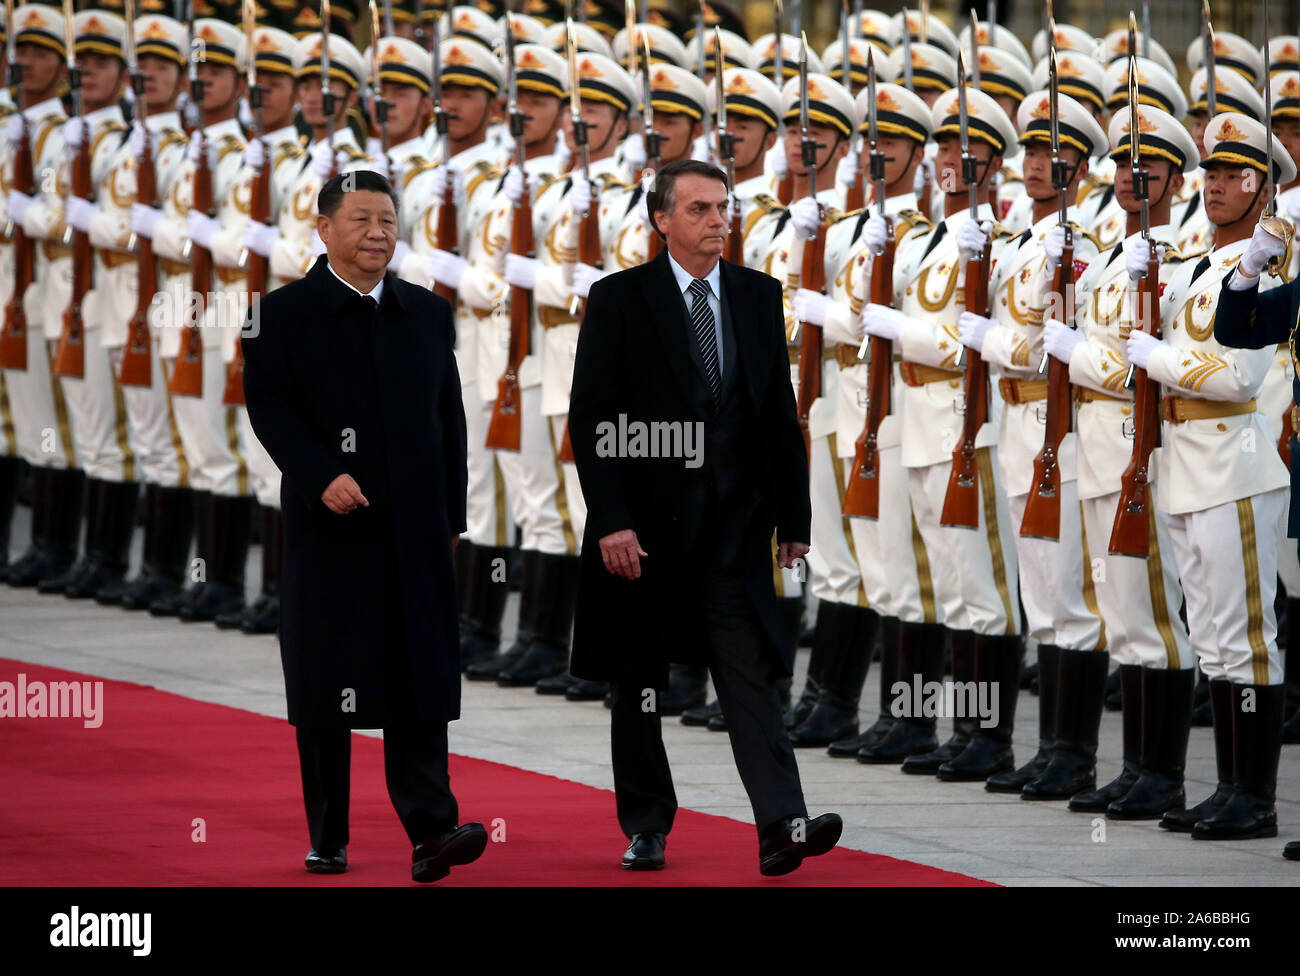 Beijing, China. 25th Oct, 2019. Brazilian President Jair Bolsonaro (R) is escorted by Chinese President Xi Jinping during a welcoming ceremony at the Great Hall of the People in Beijing on Friday, October 25, 2019. Bolsonaro told a forum that China and Brazil 'were born to walk together' and the two governments are 'completely aligned in a way that reaches beyond our commercial and business relationship.' Photo by Stephen Shaver/UPI Credit: UPI/Alamy Live News Stock Photo